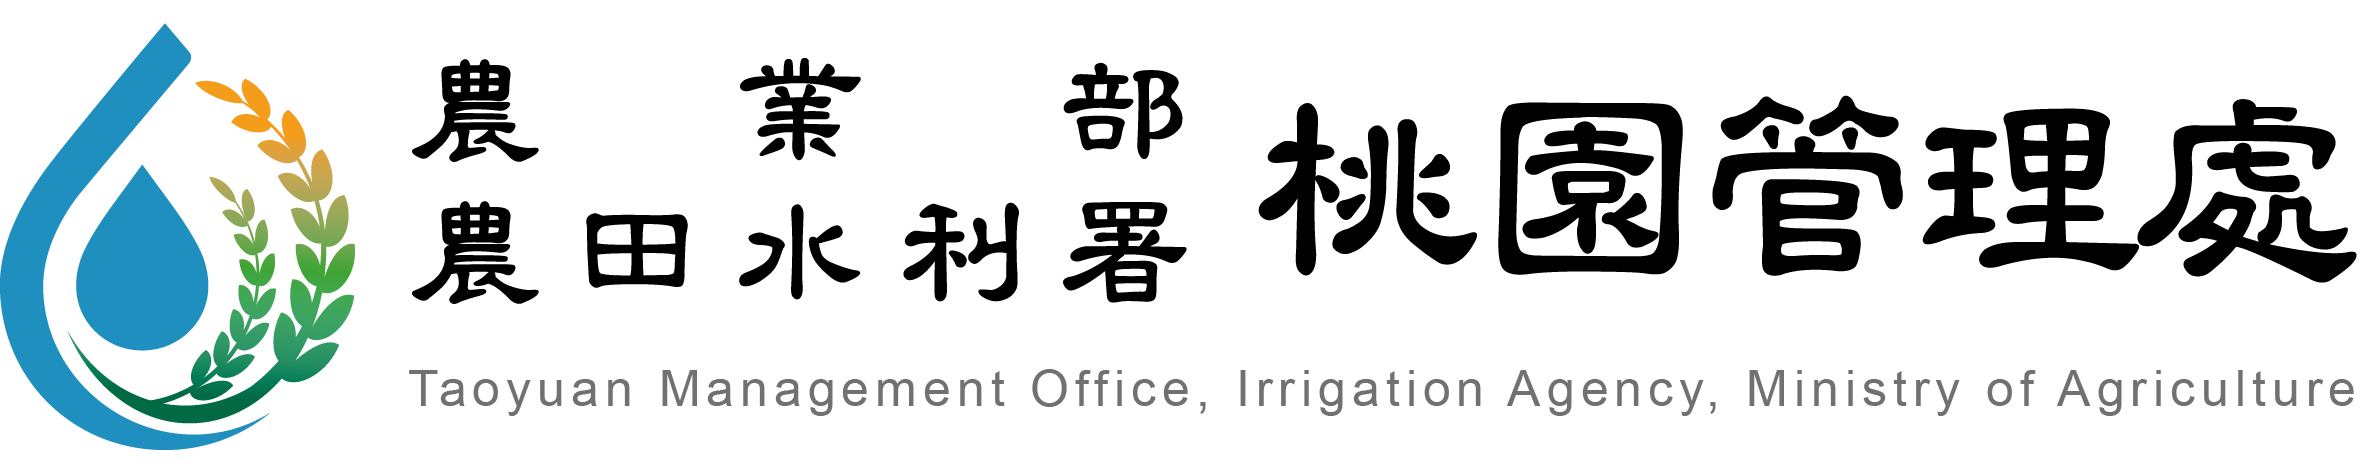 Taoyuan Management Office,  Irrigation Agency